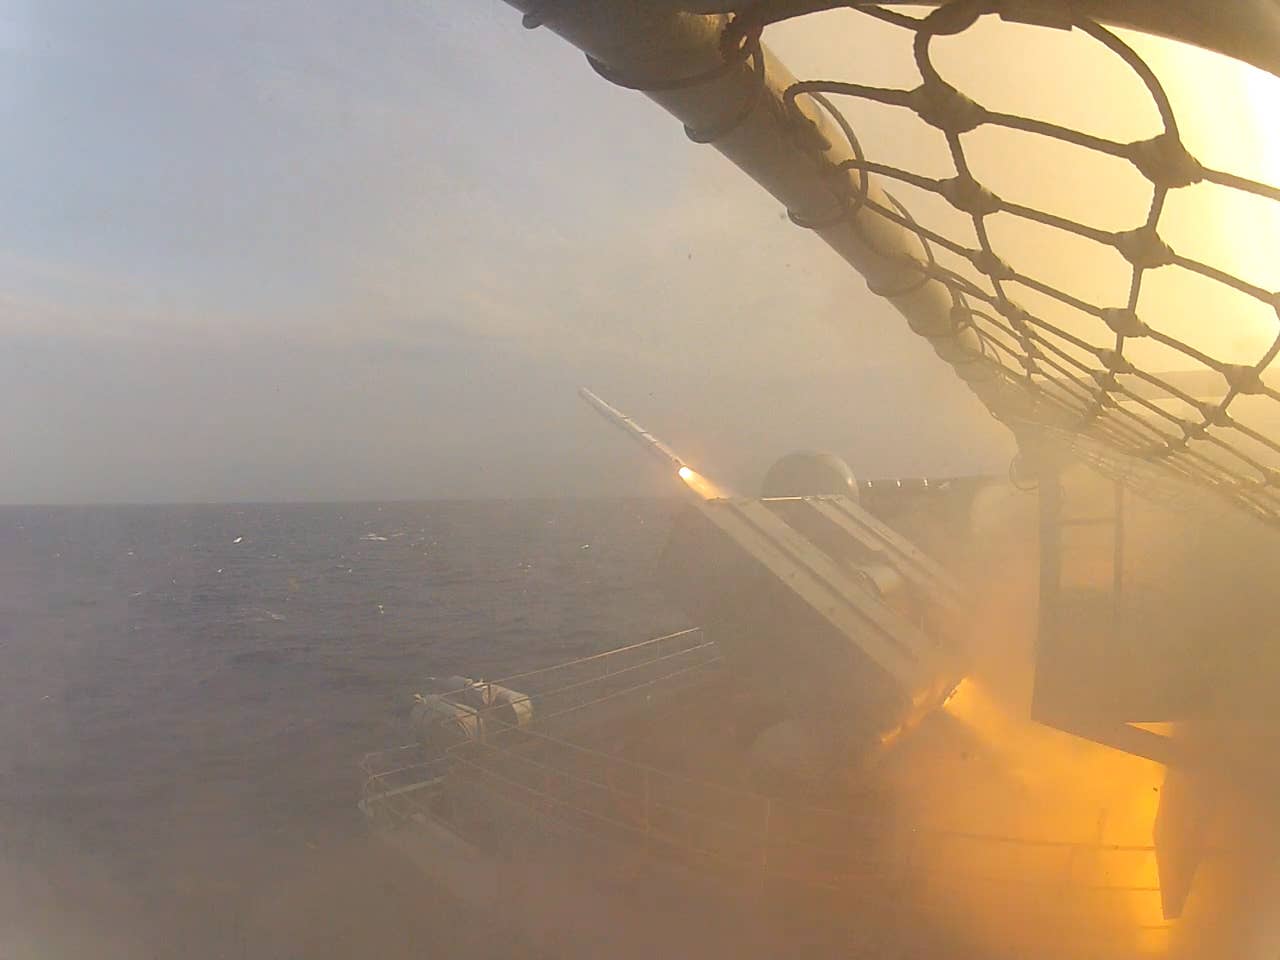 The aircraft carrier USS Theodore Roosevelt (CVN 71) test fires its NATO Evolved Sea Sparrow Missile System during a combat system ship qualification trial. Theodore Roosevelt is underway preparing for future deployments. (U.S. Navy photo/Released)